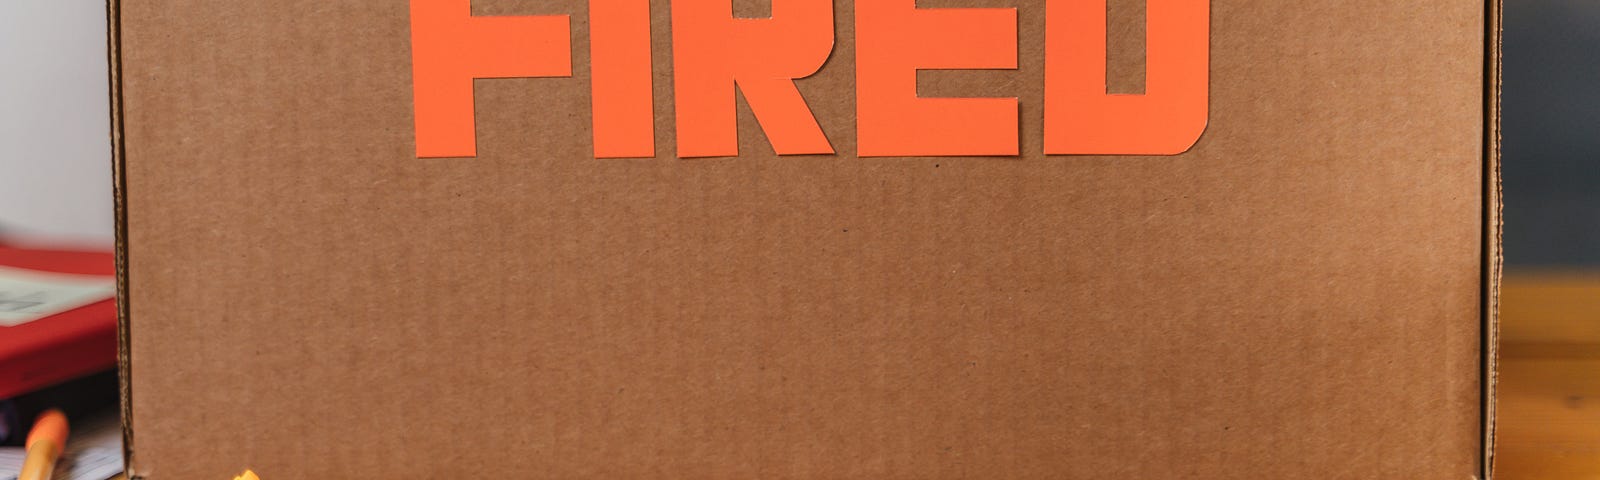 Photo of the side of a cardboard box with the word FIRED cut out from orange construction paper. In front of the box are wadded up stickies.